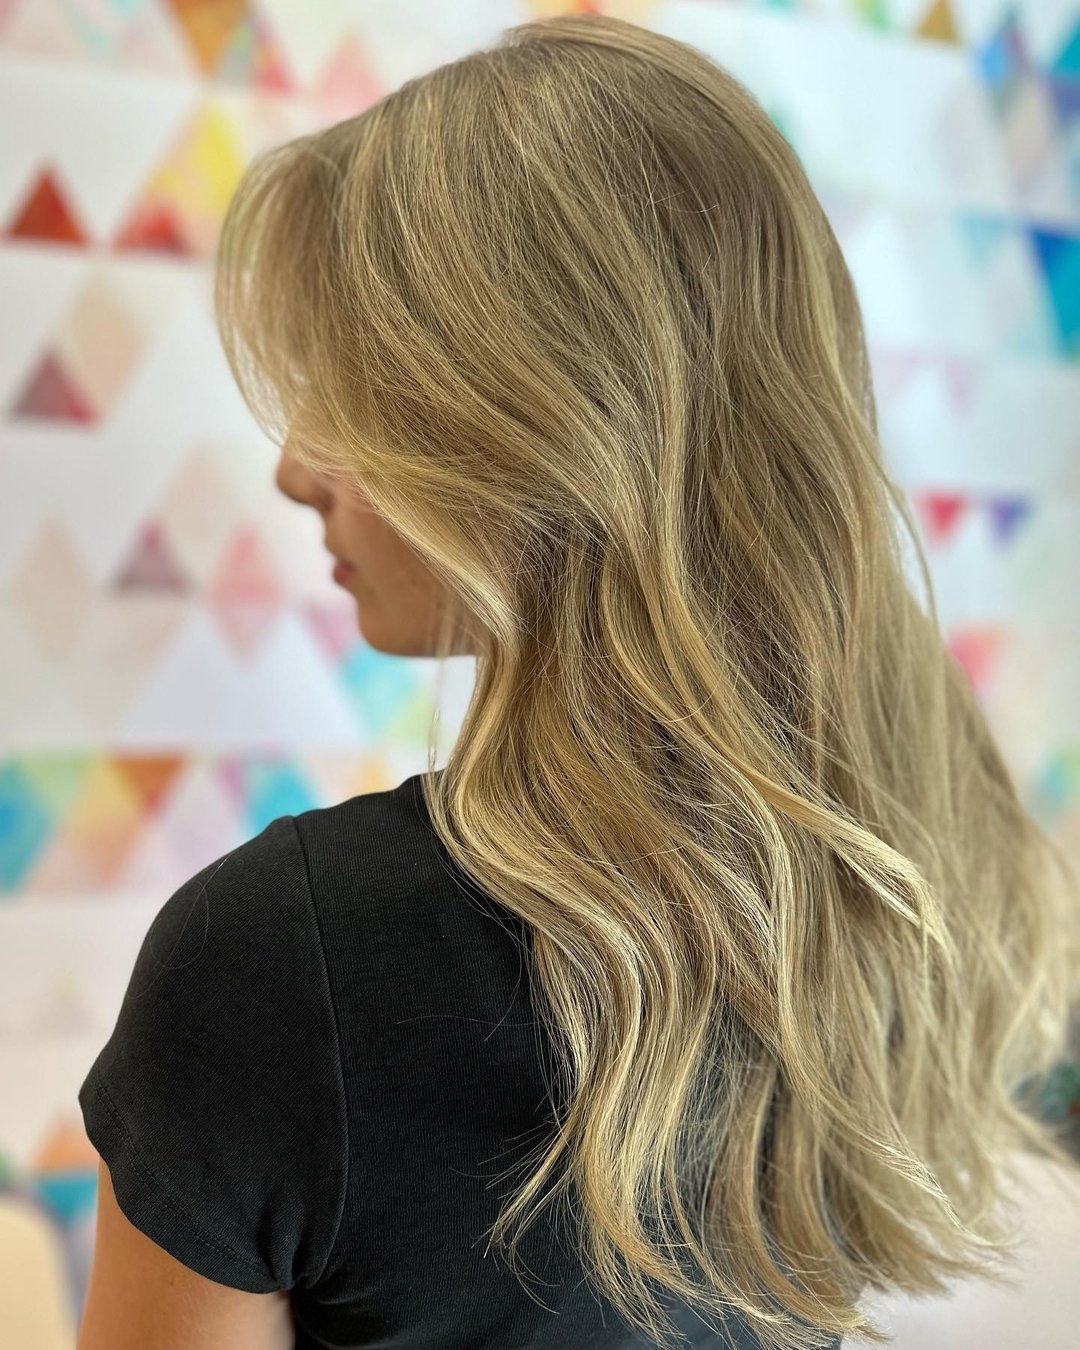 This beautiful client wanted a more natural lived-in look

#dimesalonhalifax #colourcorrection #blondespecialist #bumbleandbumble #nofilter #wellaprofessionals #ghdhair #brondehair #hairgoals #healthyhair #foiliyagehair #blondehairhalifax #halifaxhai